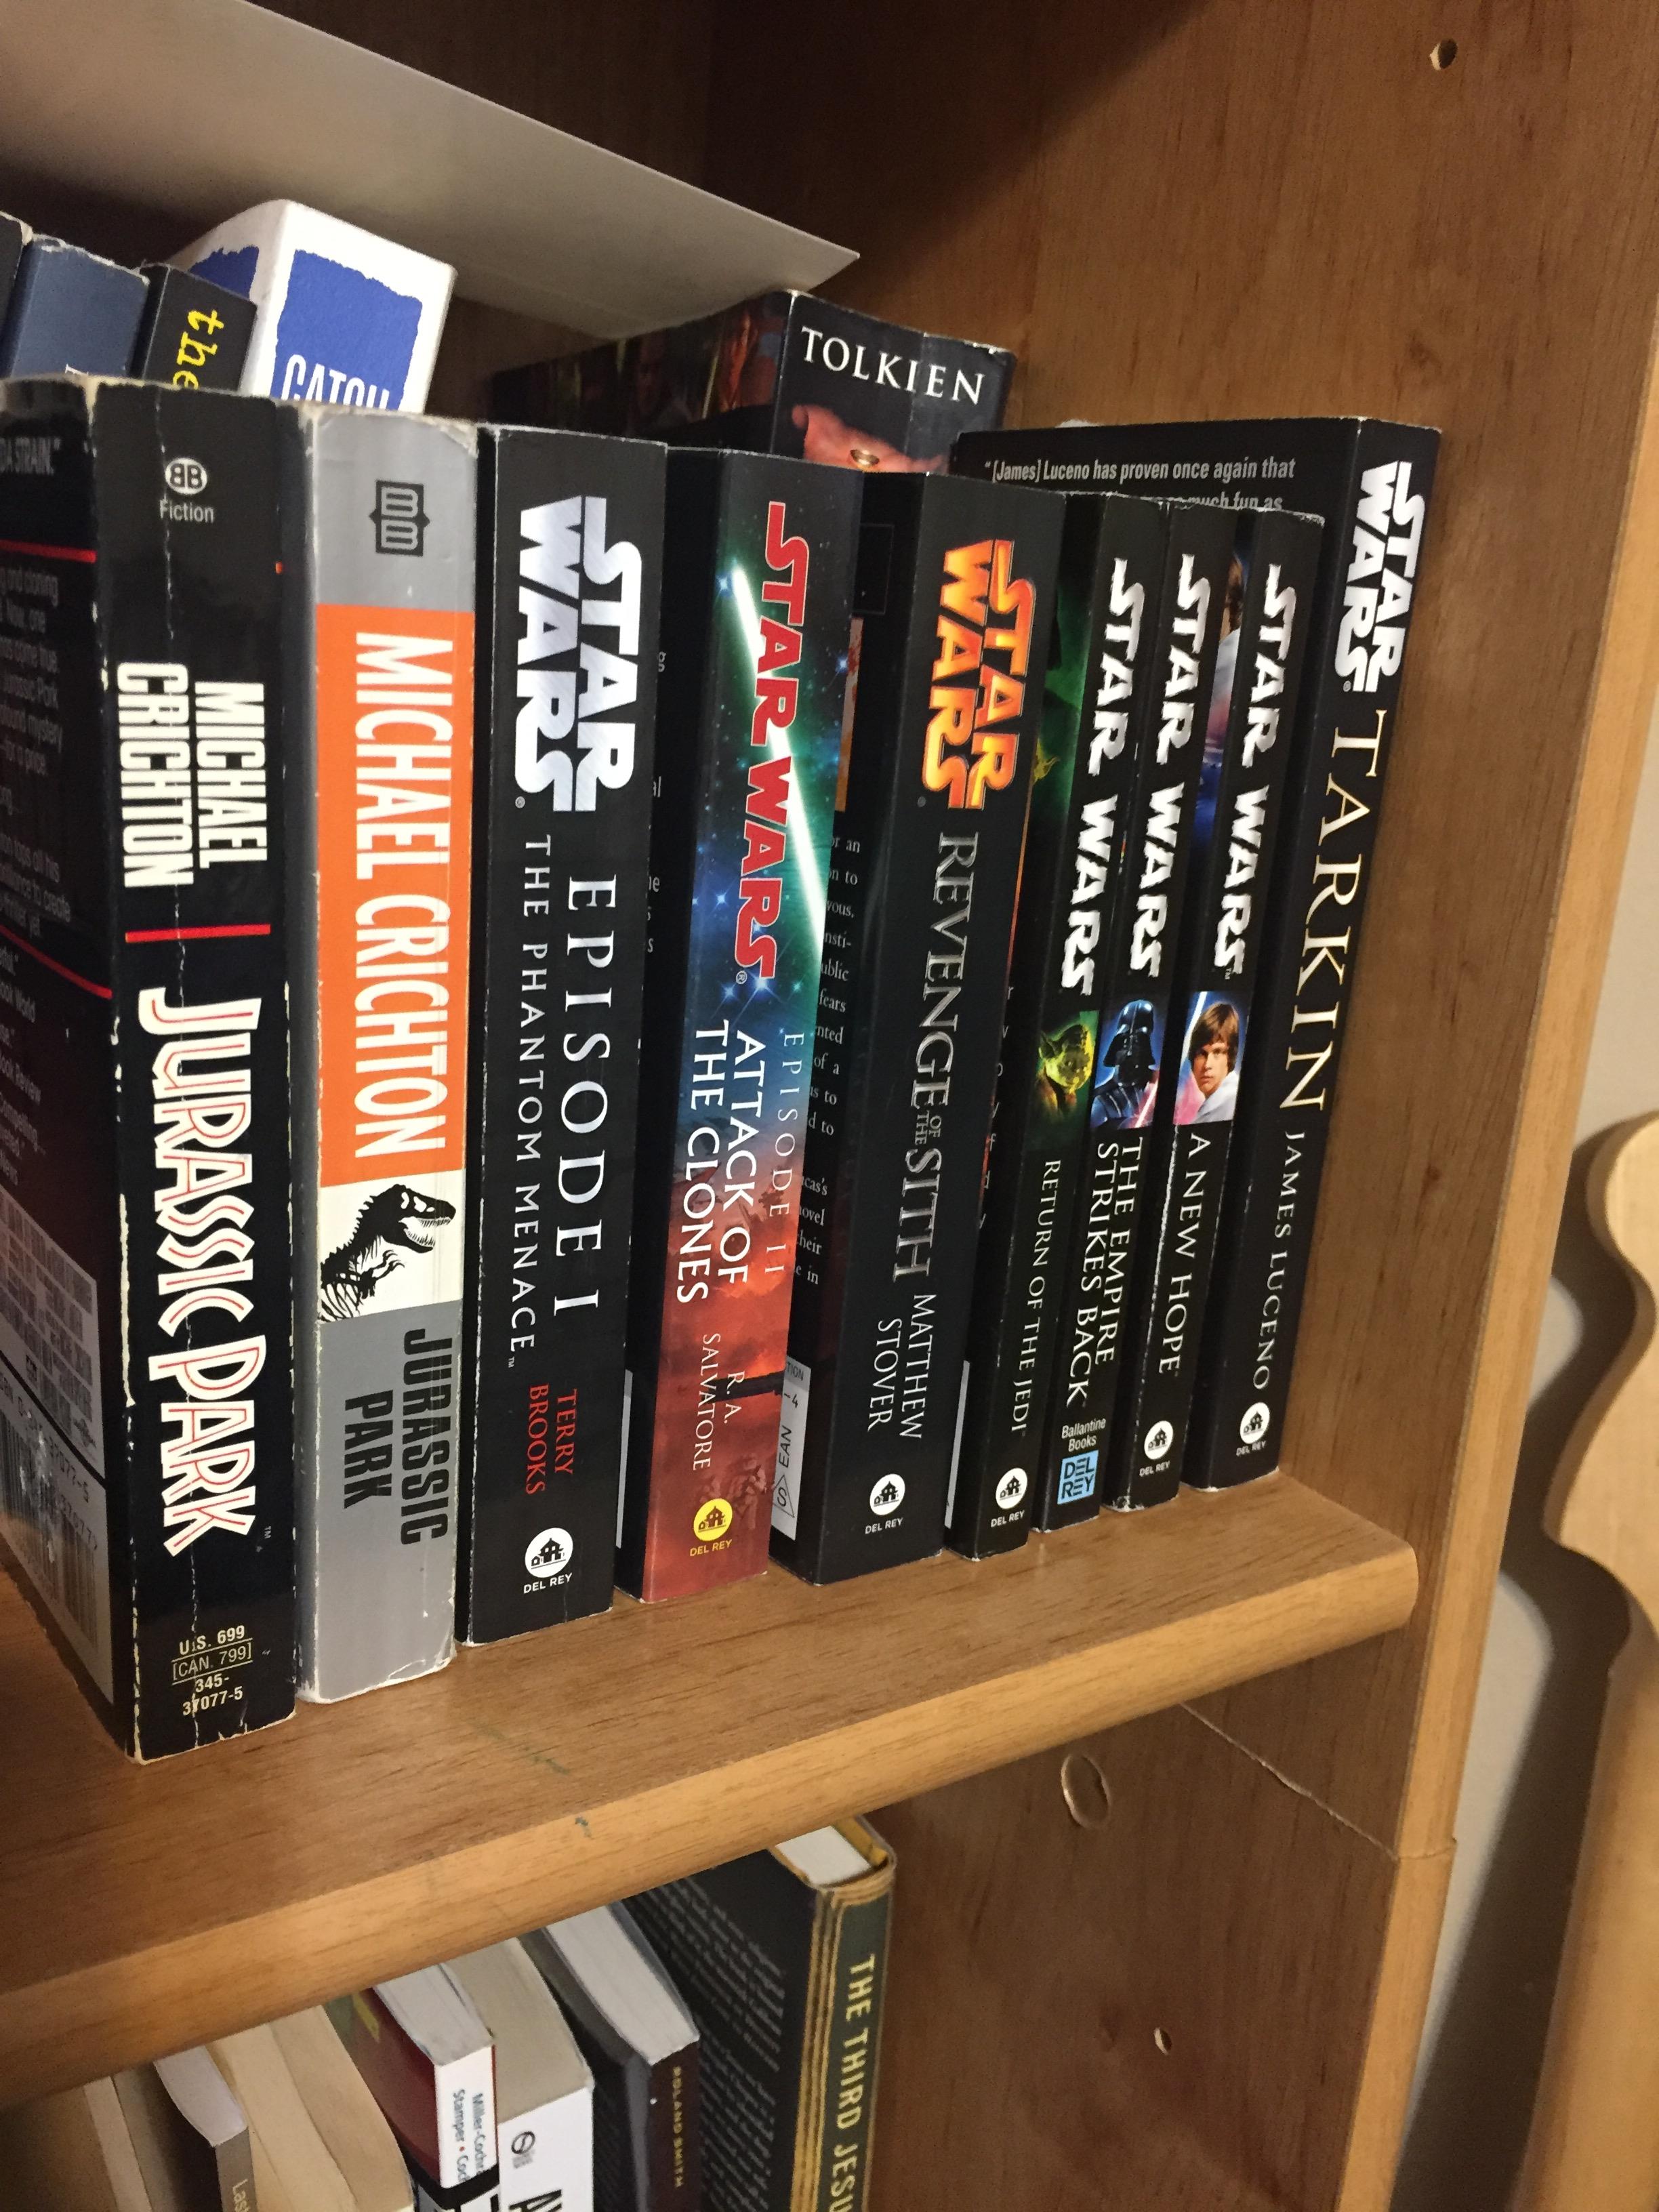 PHOTO: Image showing two copies of the novel "Jurassic Park" as well as multiple "Star Wars" novelizations and books. The books are on a book shelf among other books that can be seen in the background. Photo by The Signal managing editor Troylon Griffin II.